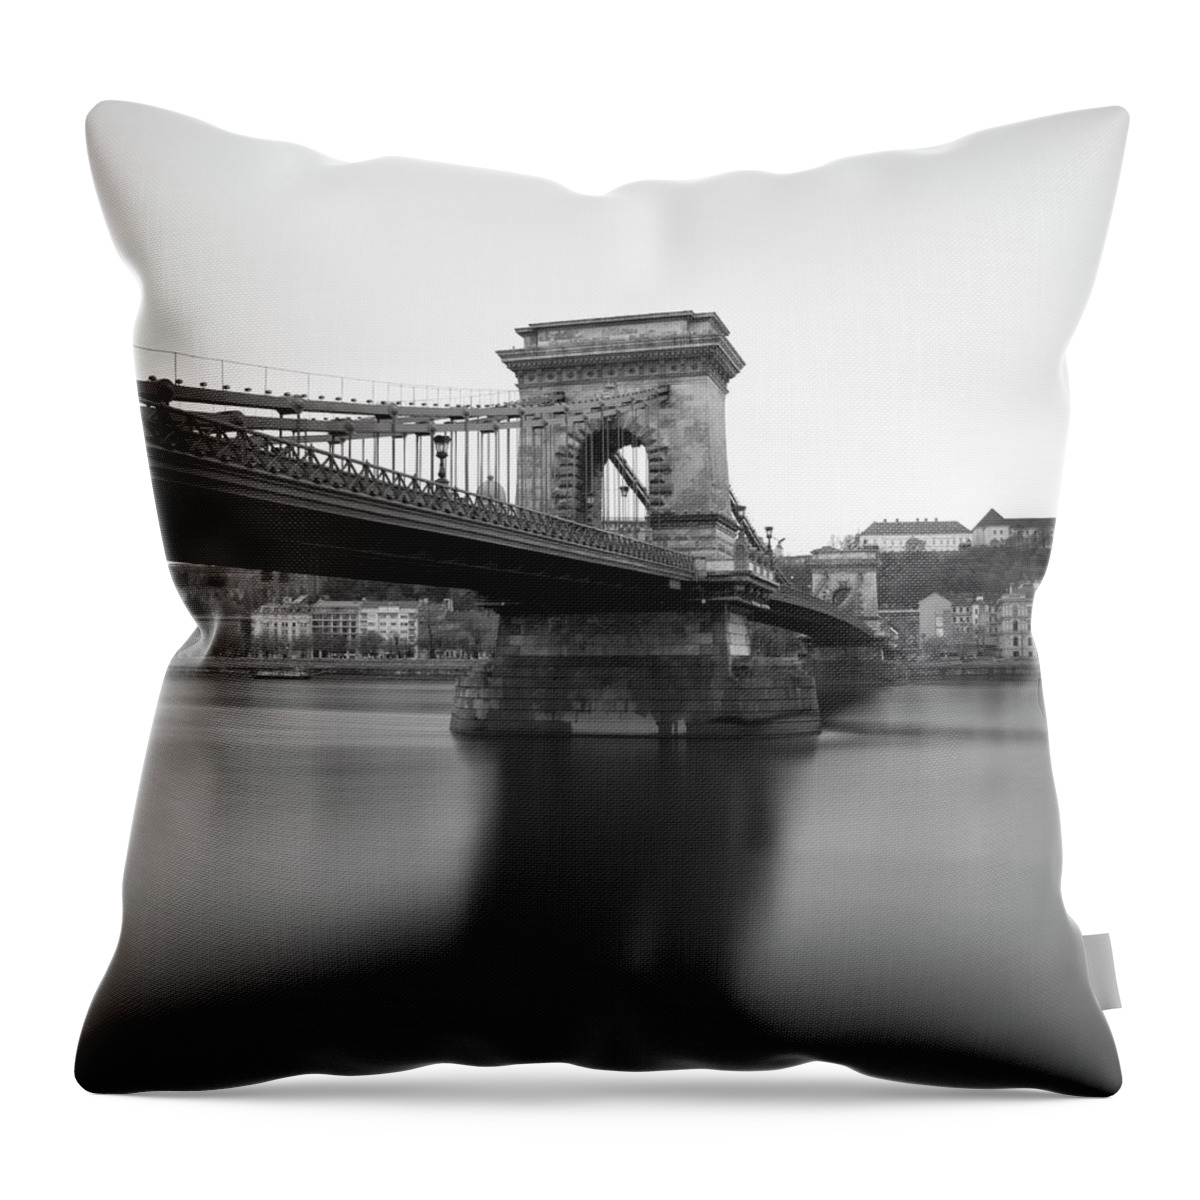 Tranquility Throw Pillow featuring the photograph Szechenyi Chain Bridge And Danube by Alex Holland